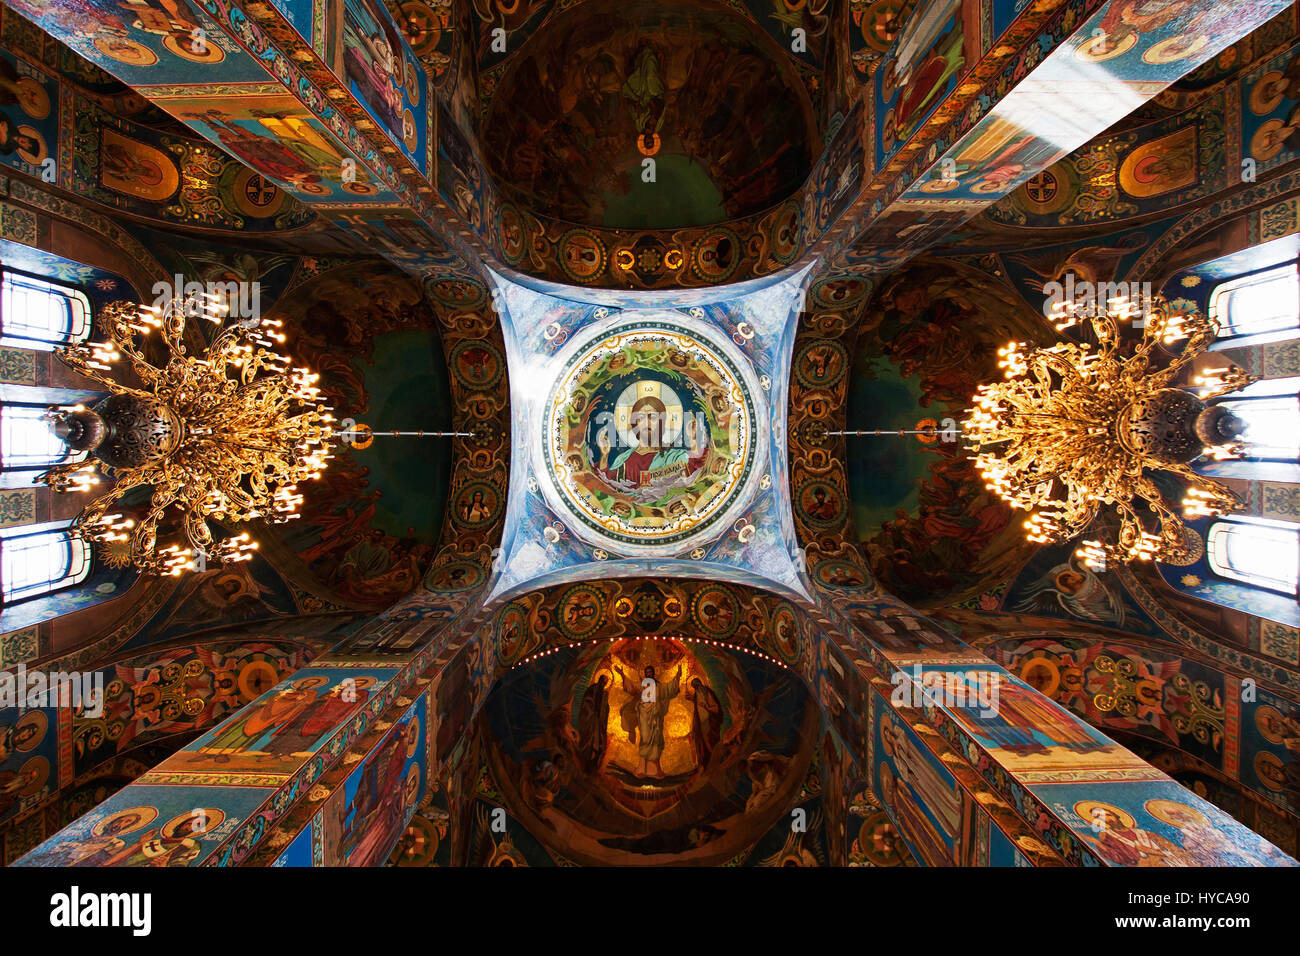 ceiling of Church the Savior on Spilled, Blood St Petersburg, Russia Stock Photo